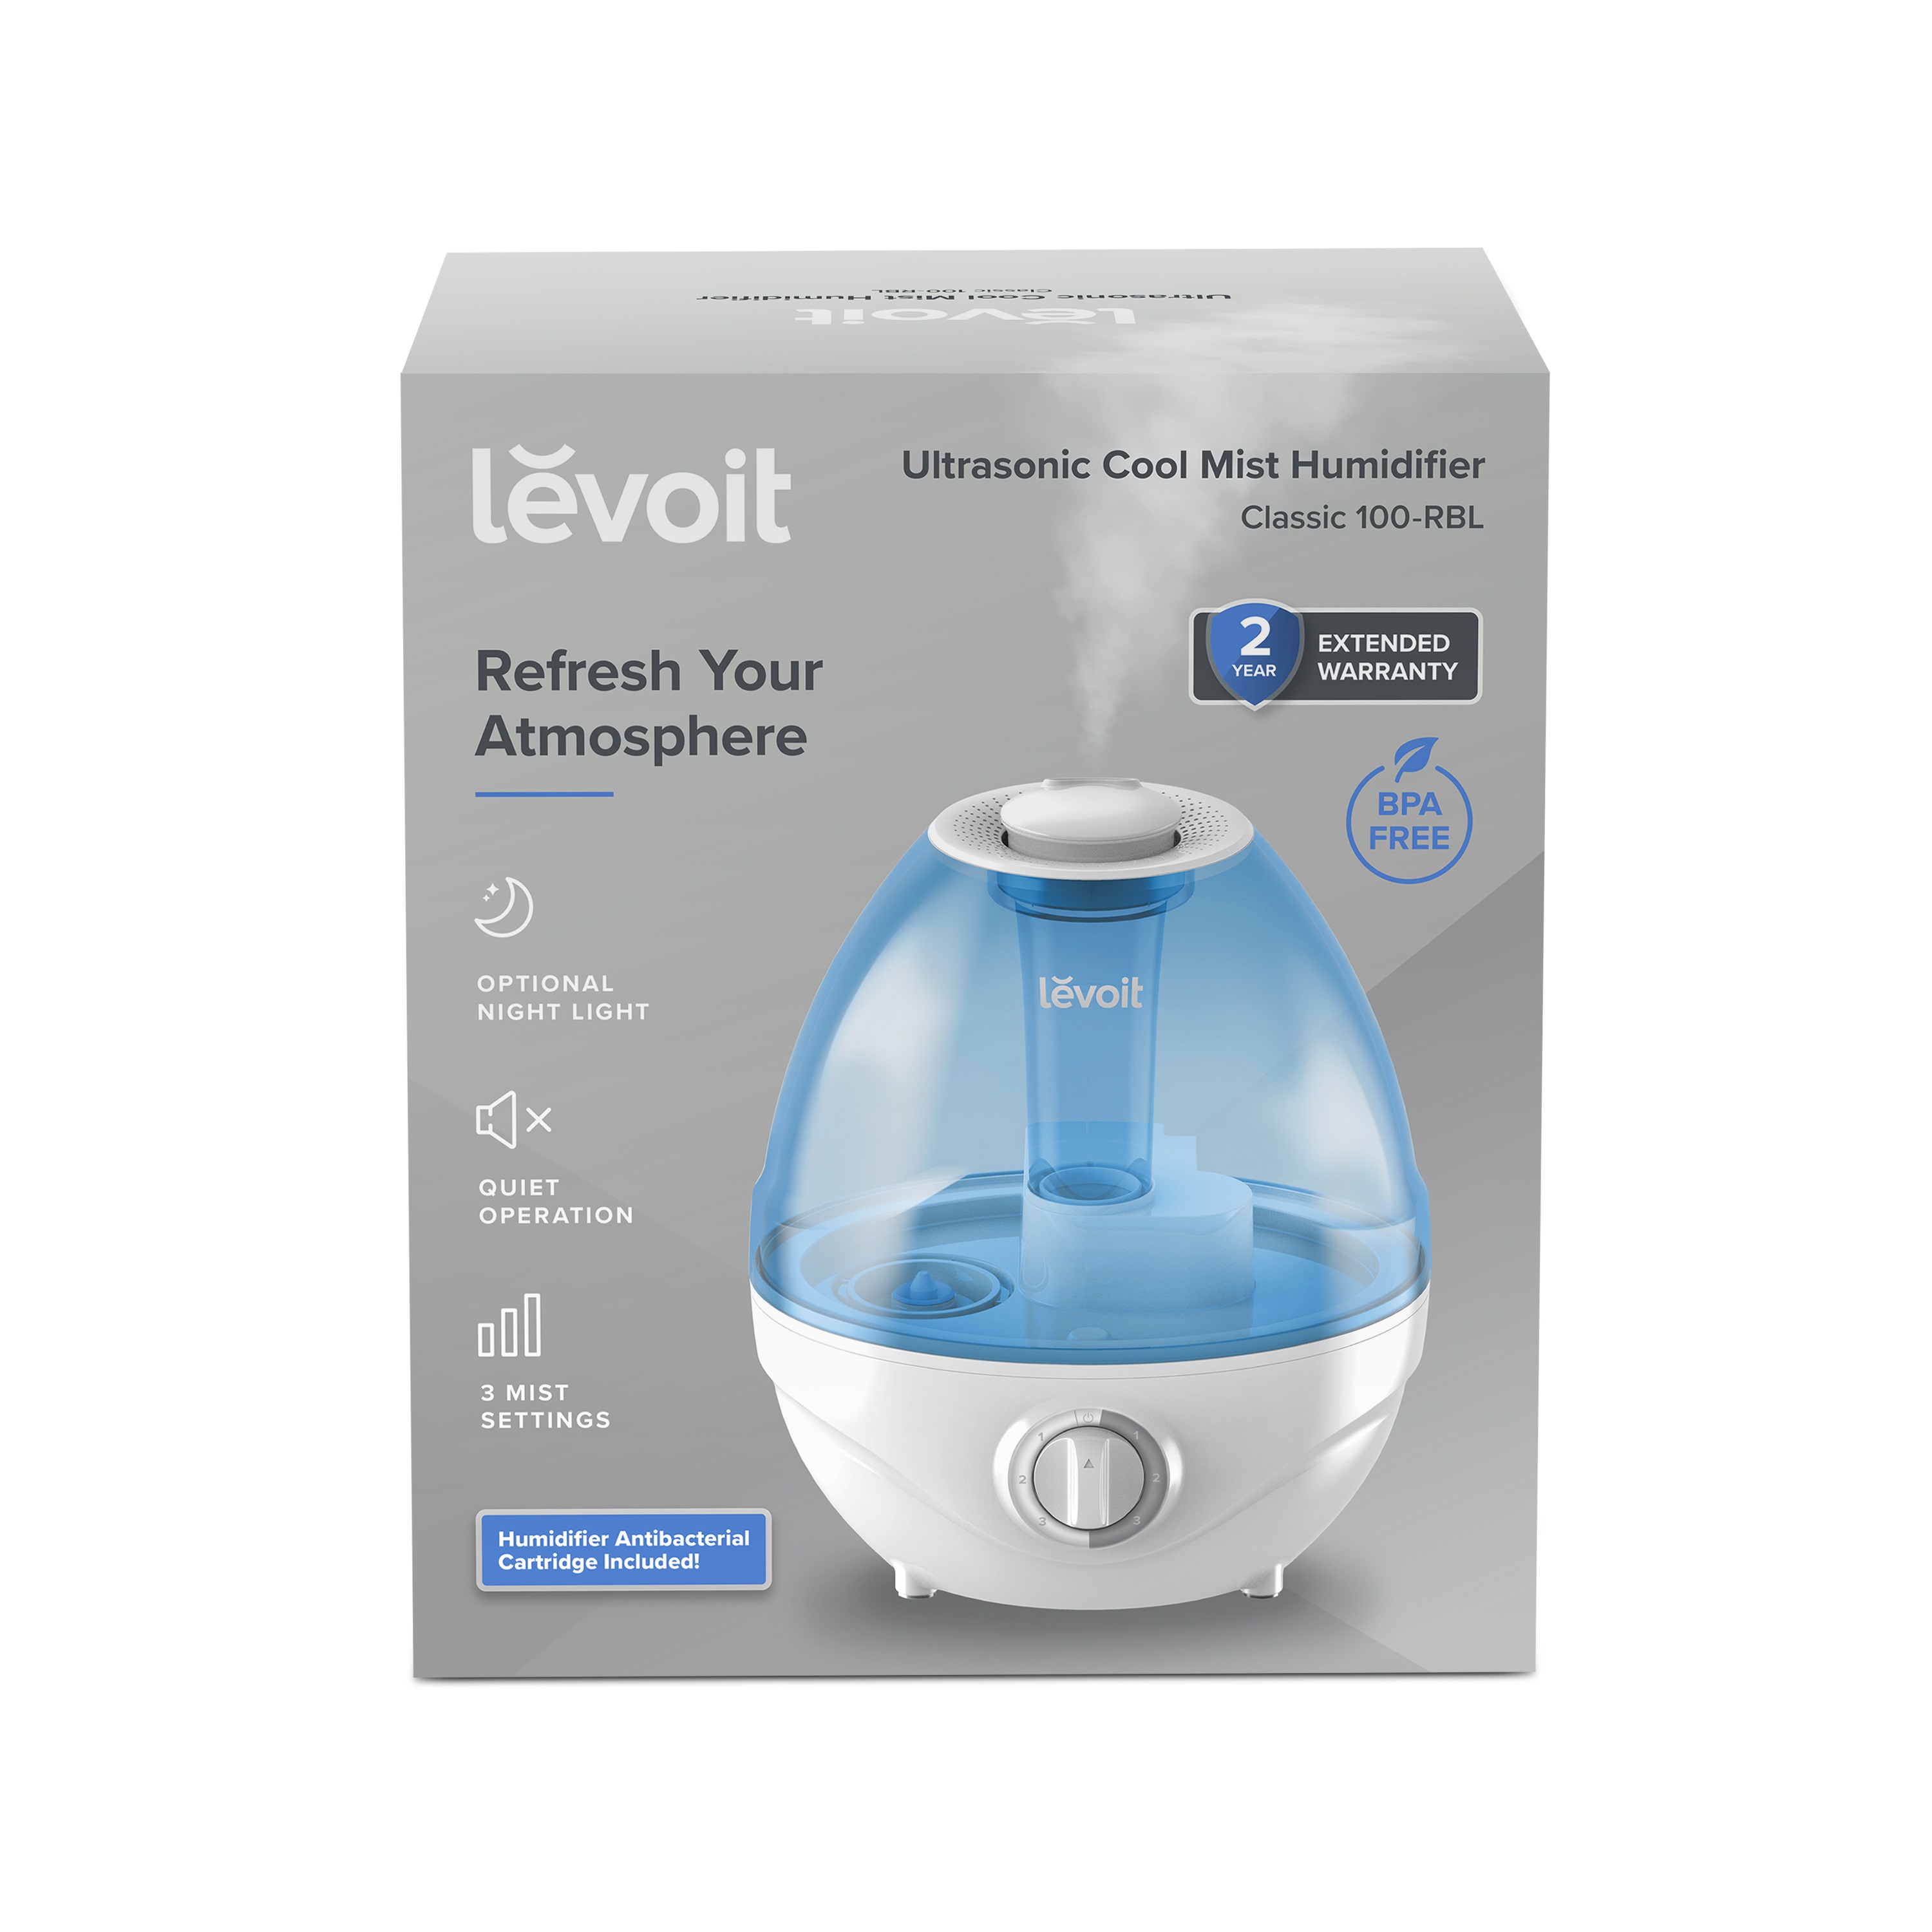 Levoit 2.4L 290 sq ft Ultrasonic Mist Humidifier, White and Blue - image 3 of 17